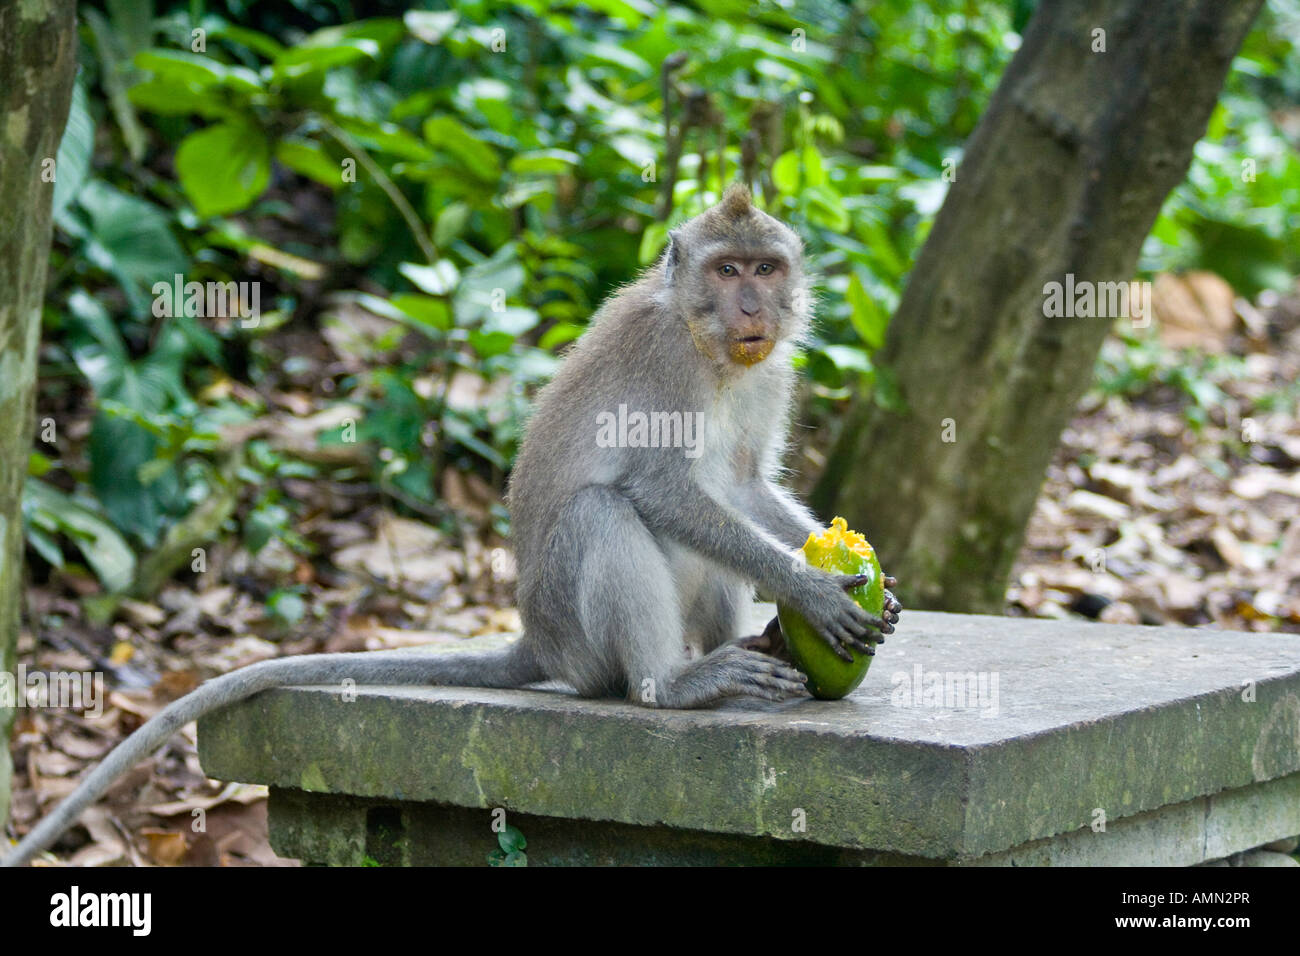 Eating Green Mango Long Tailed Macaques Macaca Fascicularis Monkey Forest Ubud Bali Indonesia Stock Photo